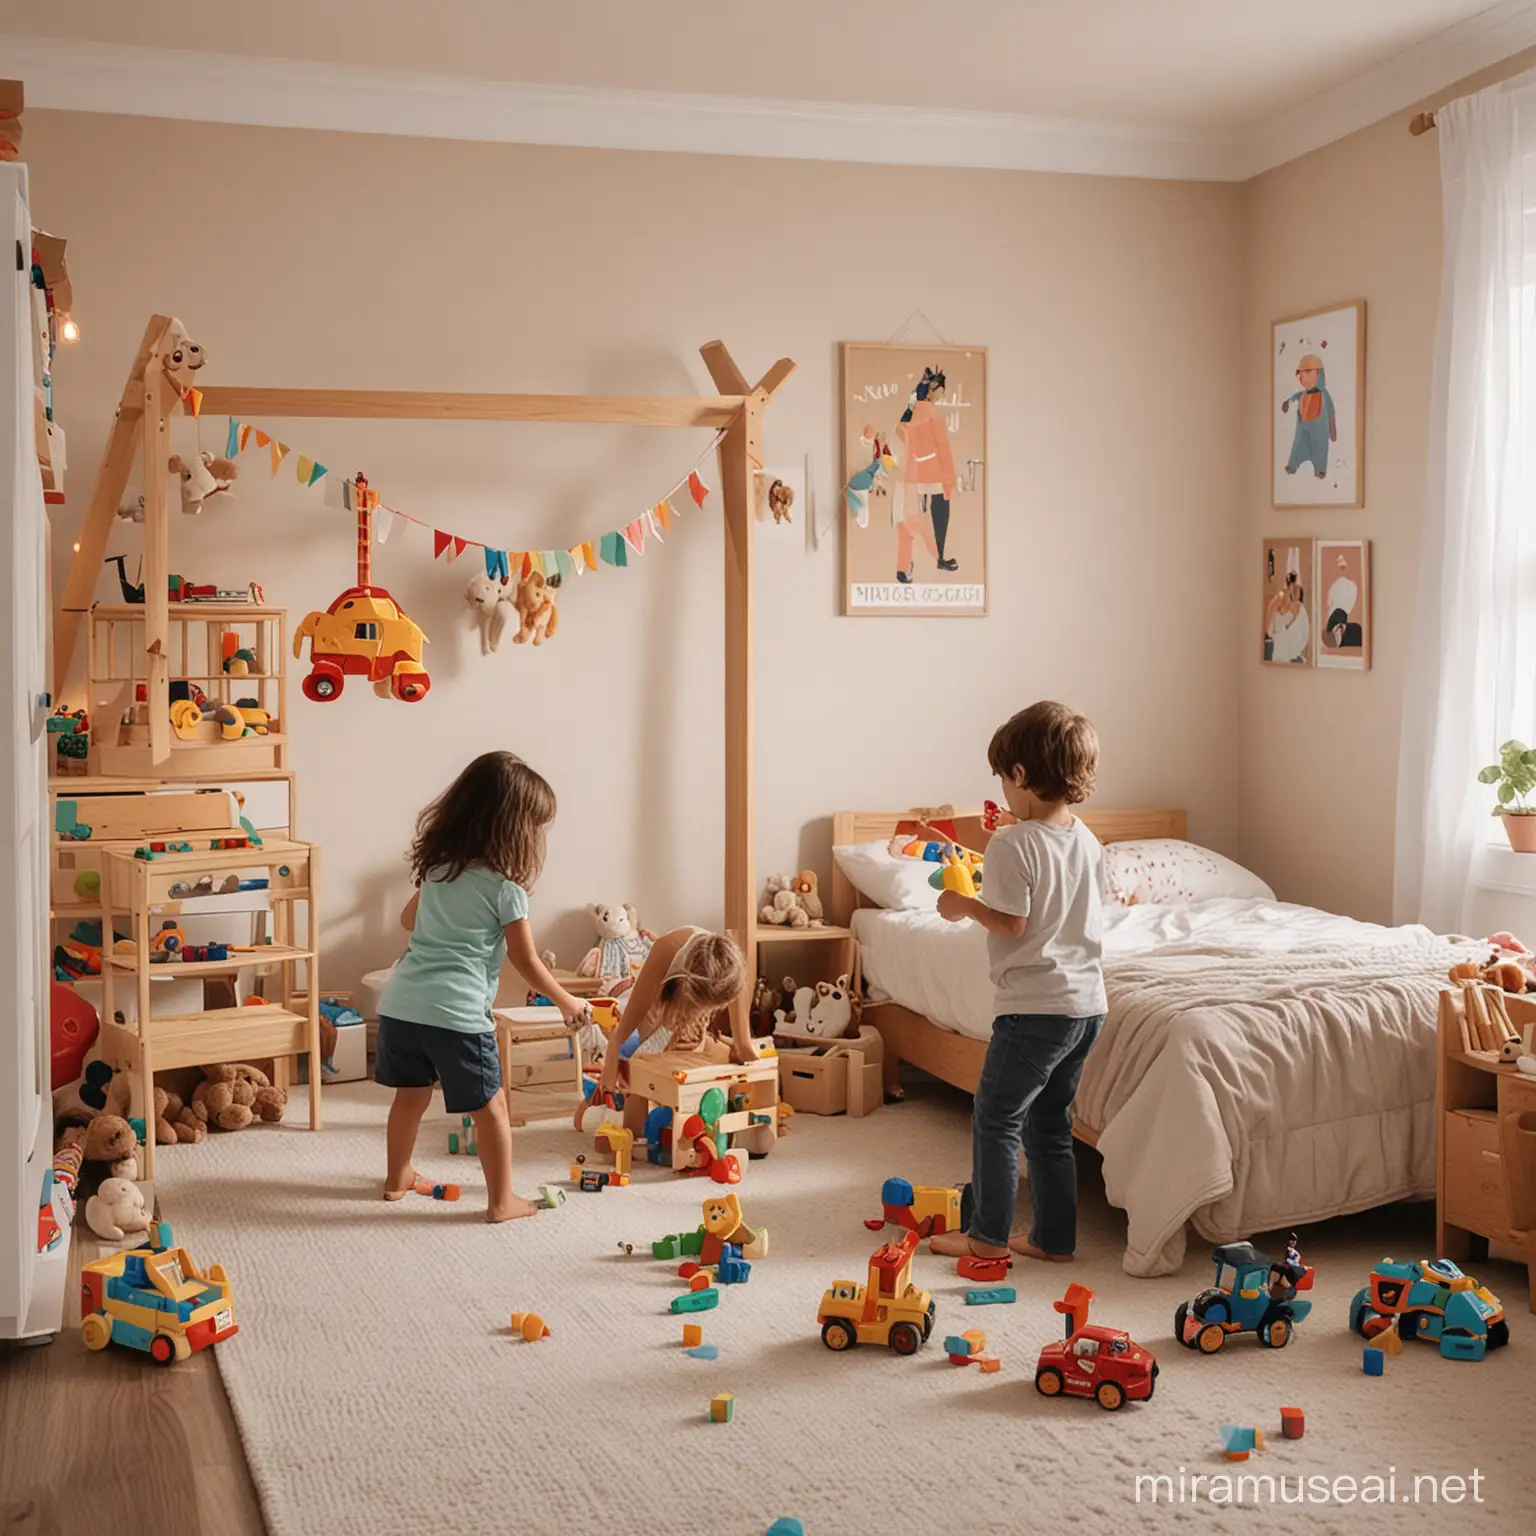 kids playing with toys inside bedroom